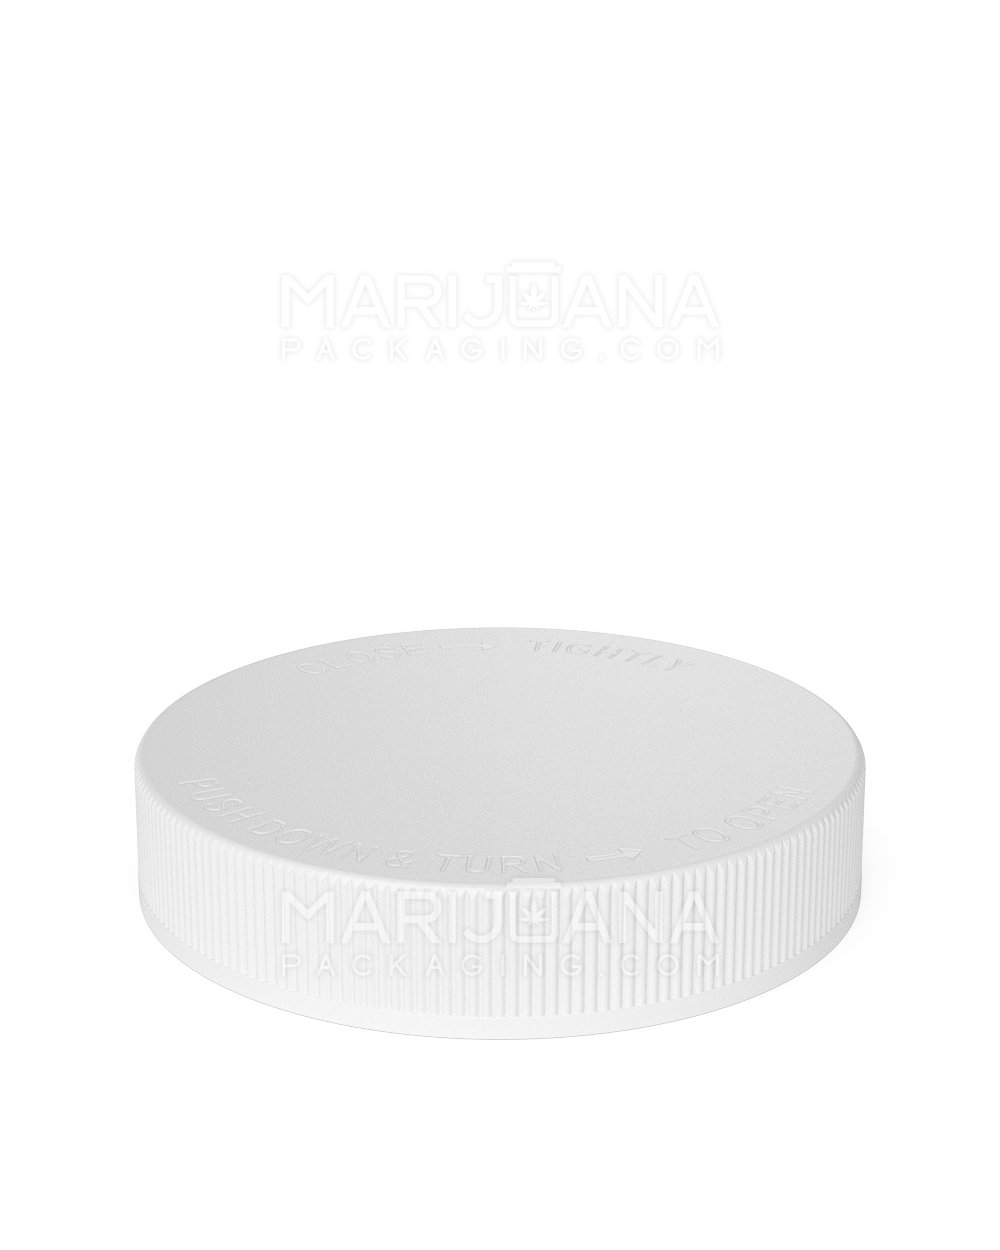 Child Resistant | Ribbed Push Down & Turn Plastic Caps | 89mm - Semi Gloss White - 205 Count - 3